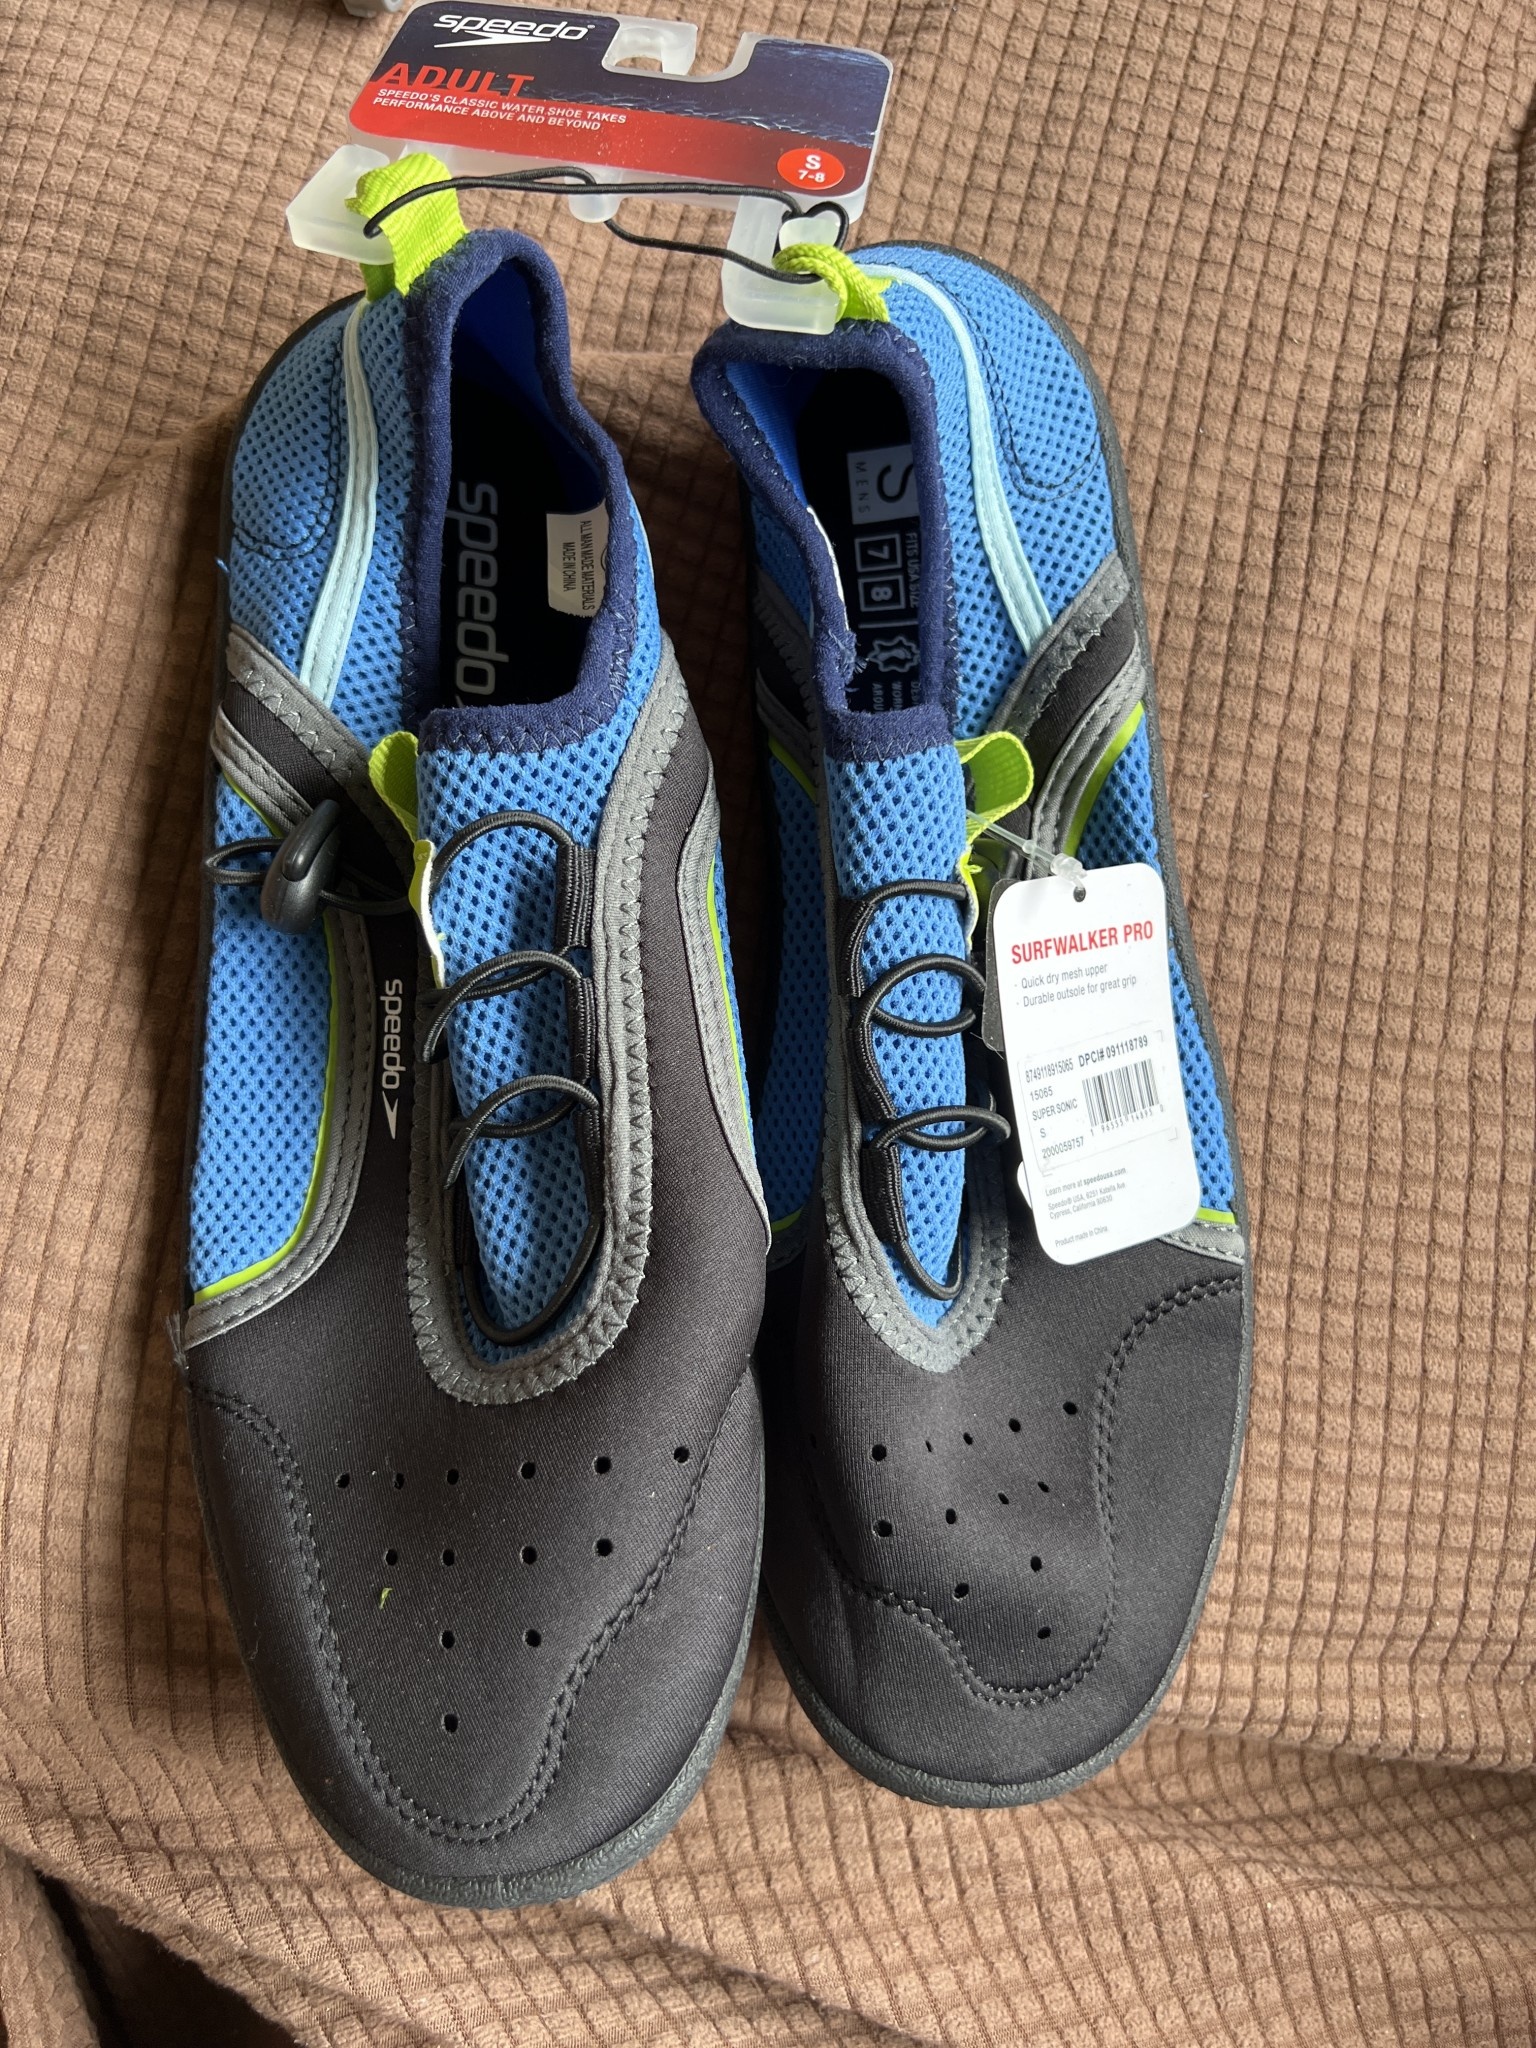 Boys Water shoes Are In Excellent Condition. Size 7-8